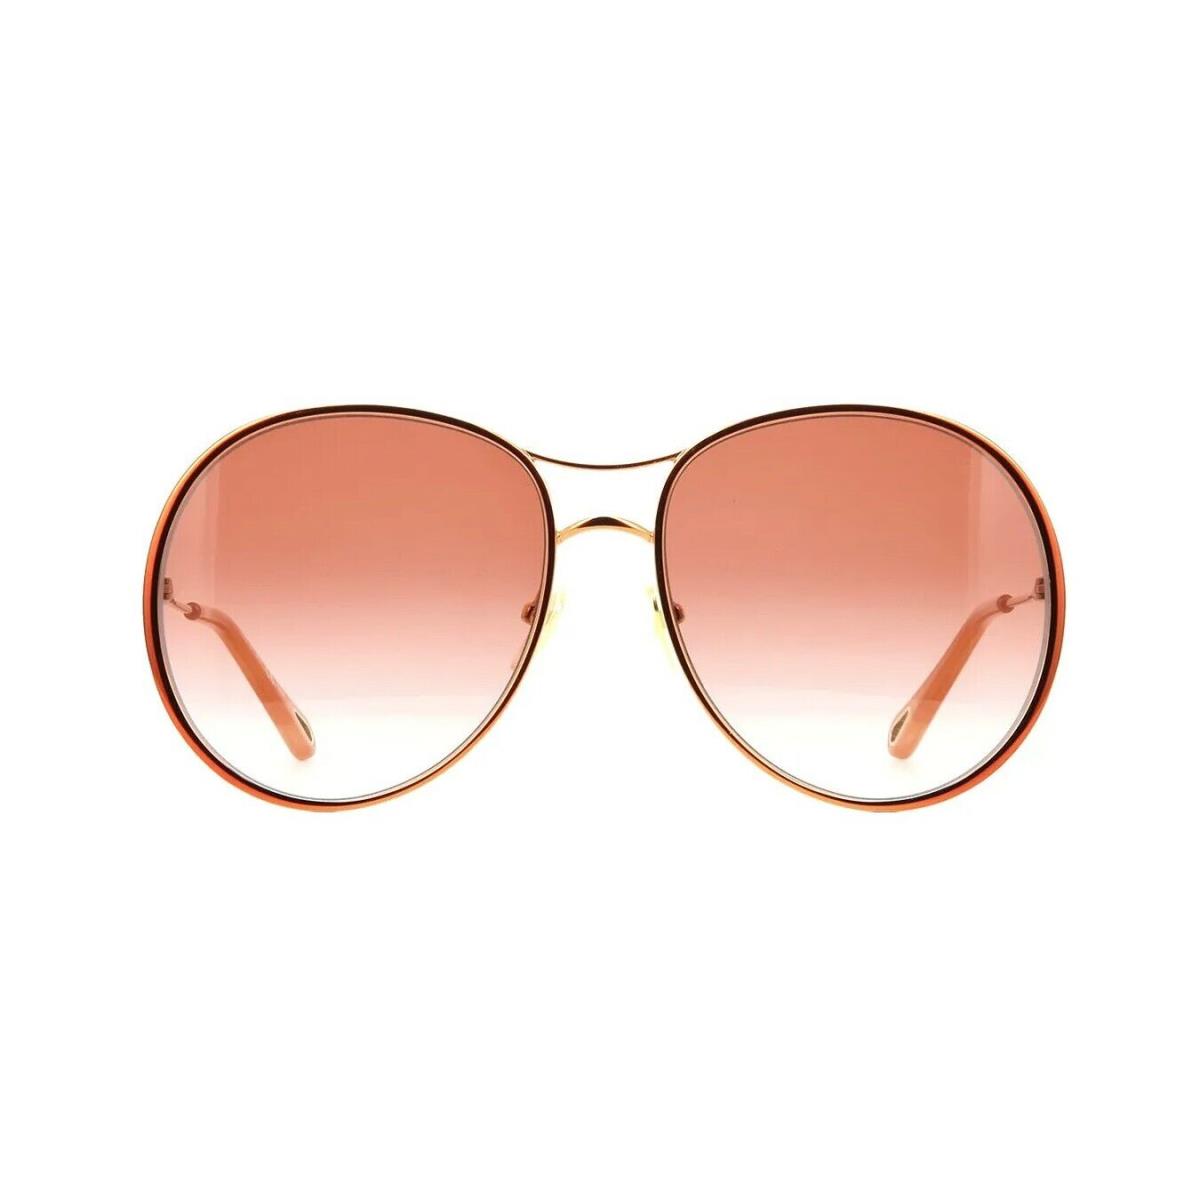 Chloé Chlo Irene CH0016S Brown and Gold/orange Shaded 003 Sunglasses